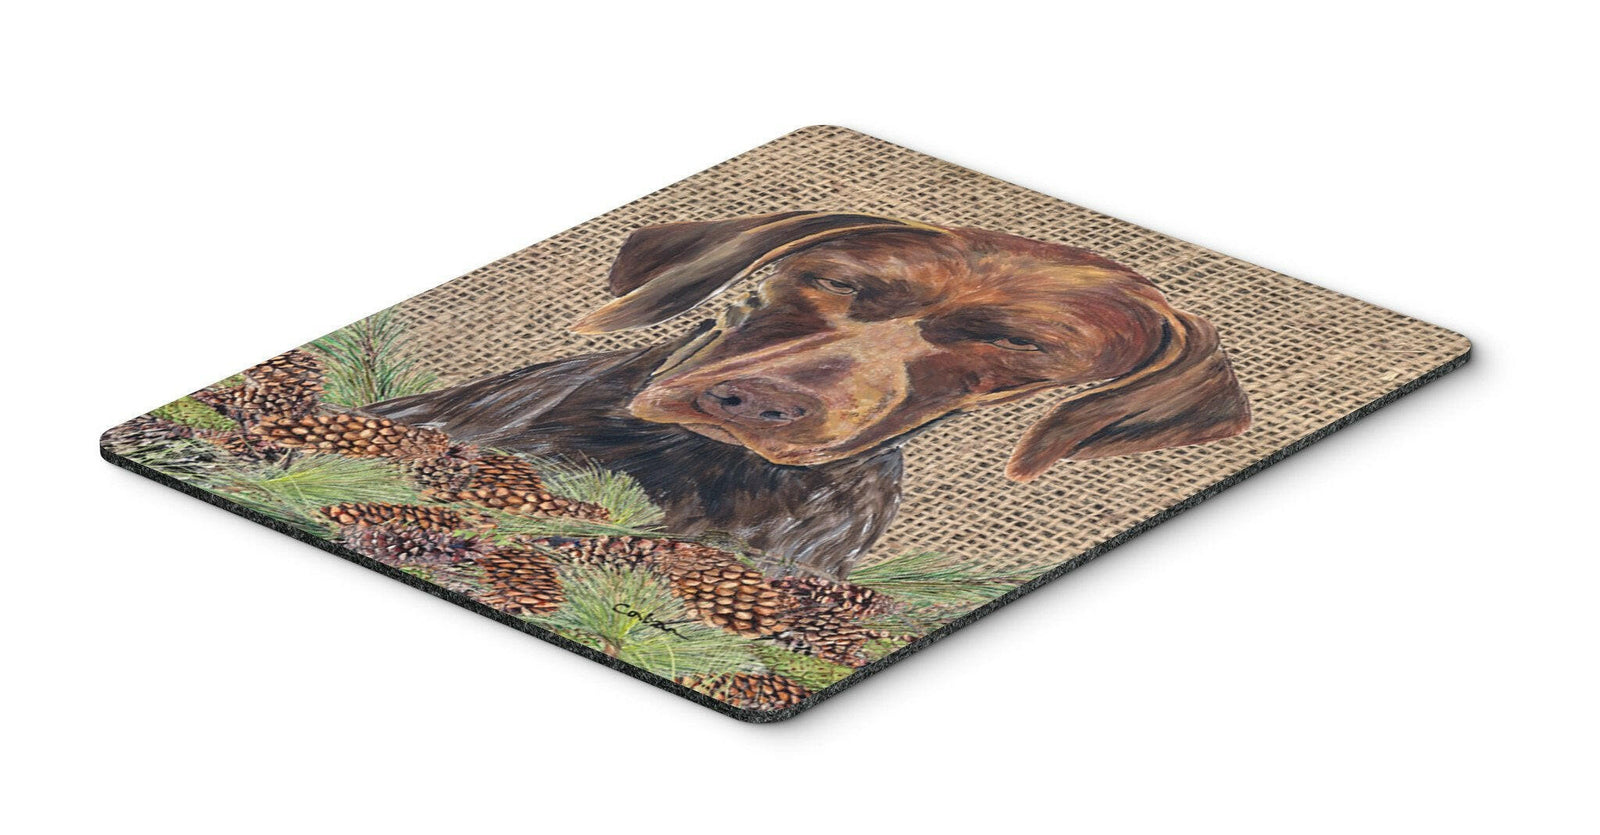 German Shorthaired Pointer Mouse Pad, Hot Pad or Trivet by Caroline's Treasures